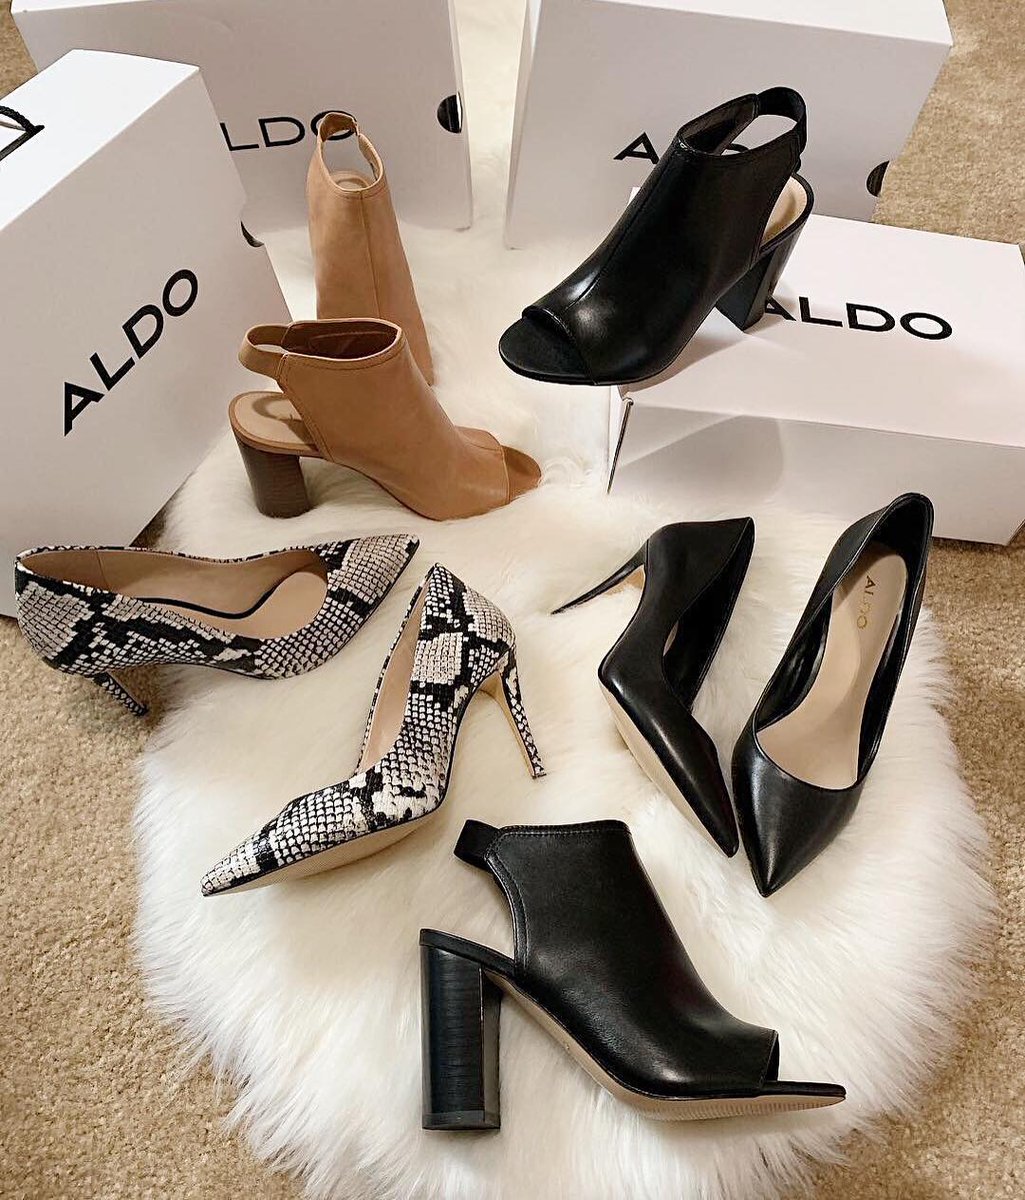 ALDO Shoes ar Twitter: “How many pairs 